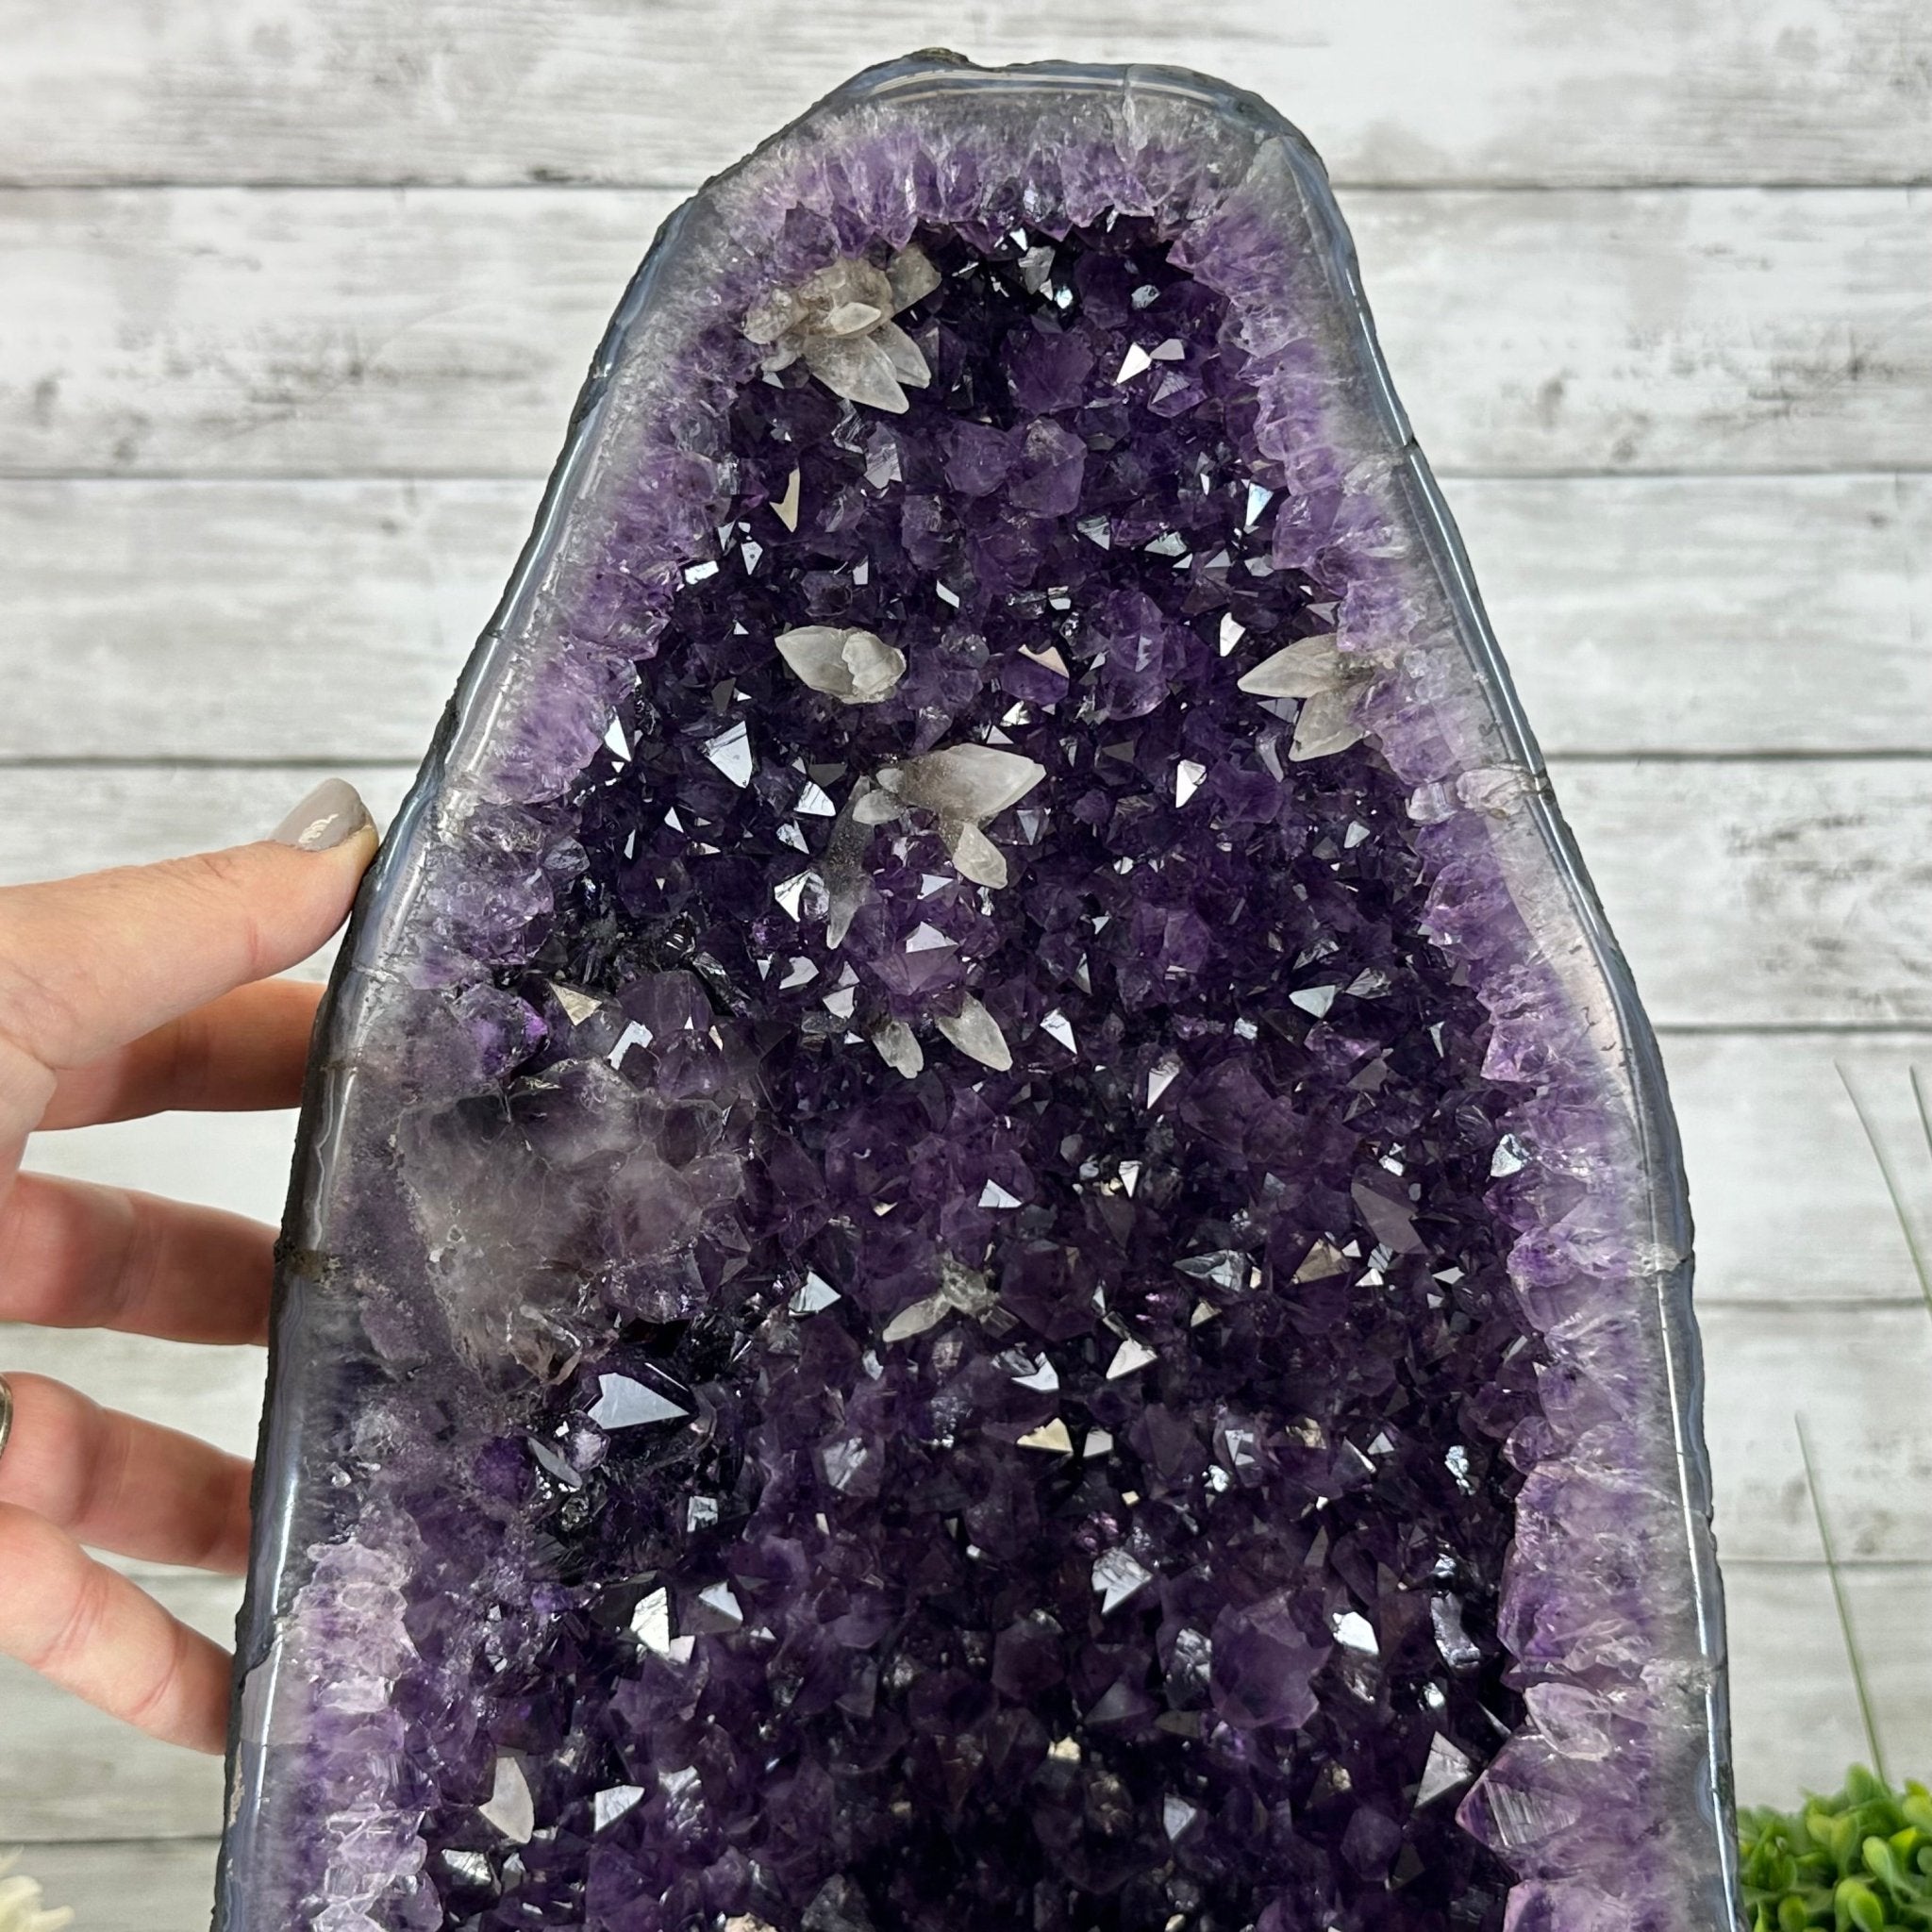 Super Quality Brazilian Amethyst Cathedral, 47.4 lbs & 18.7" Tall #5601-1316 - Brazil GemsBrazil GemsSuper Quality Brazilian Amethyst Cathedral, 47.4 lbs & 18.7" Tall #5601-1316Cathedrals5601-1316